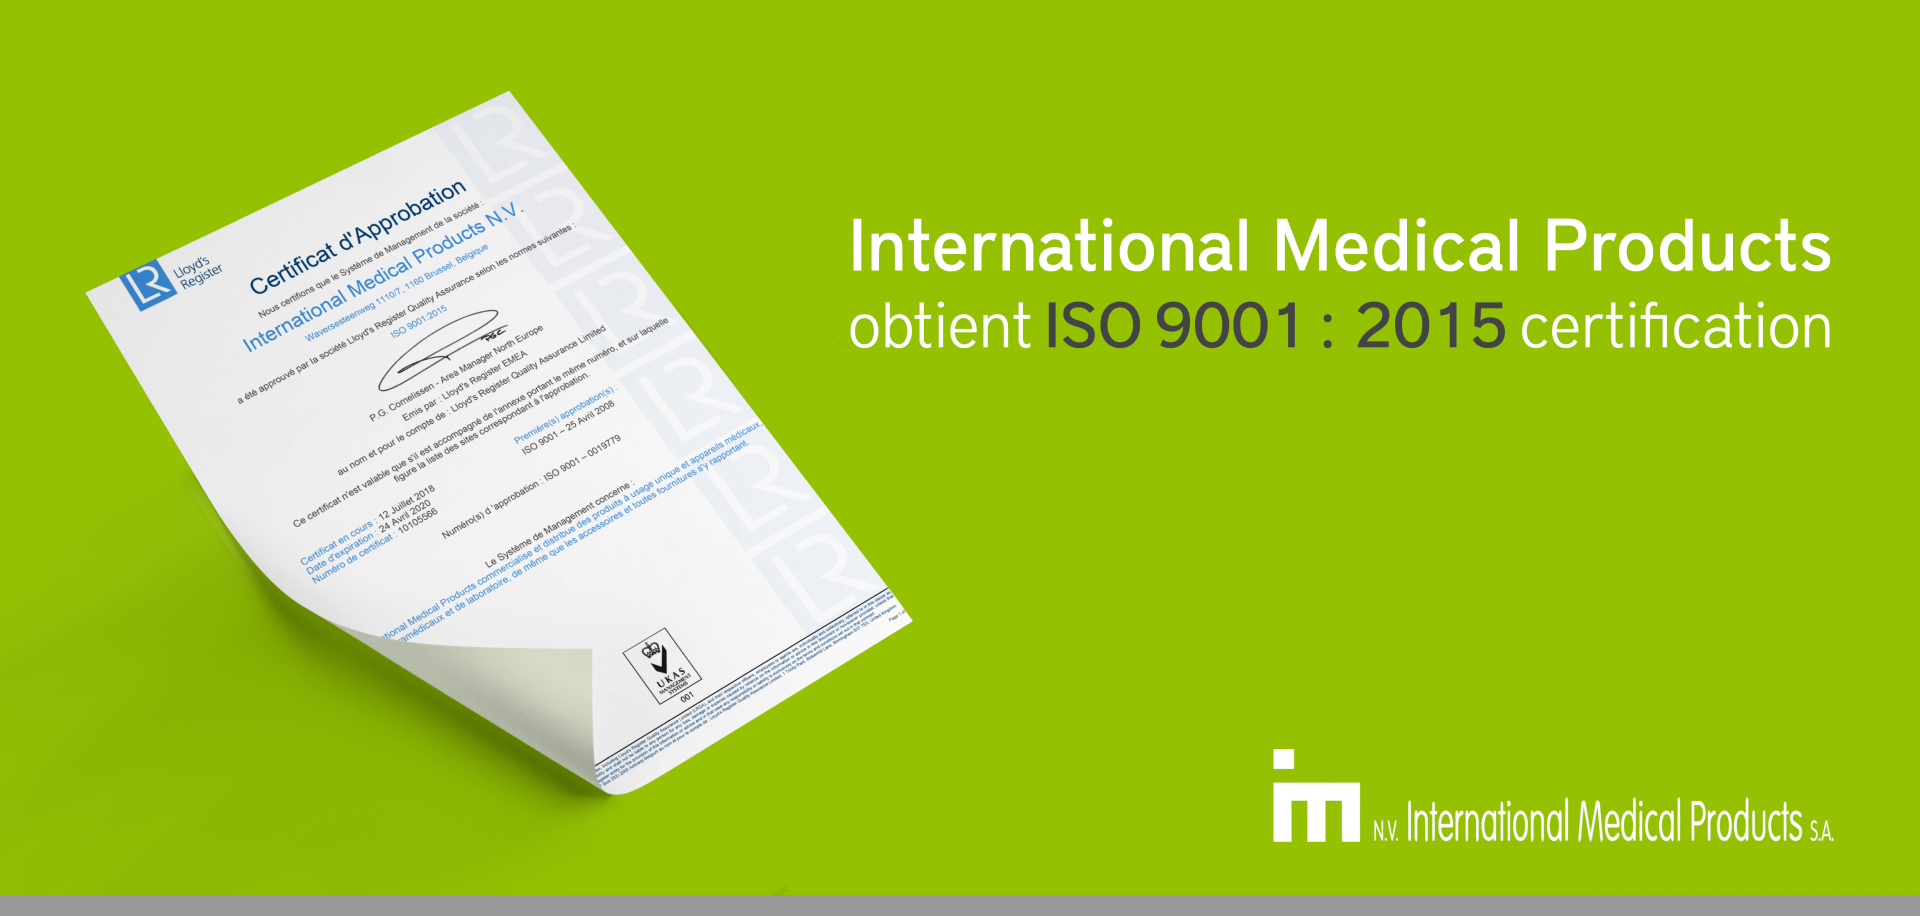 International Medical Products ISO 9001:2015 certification